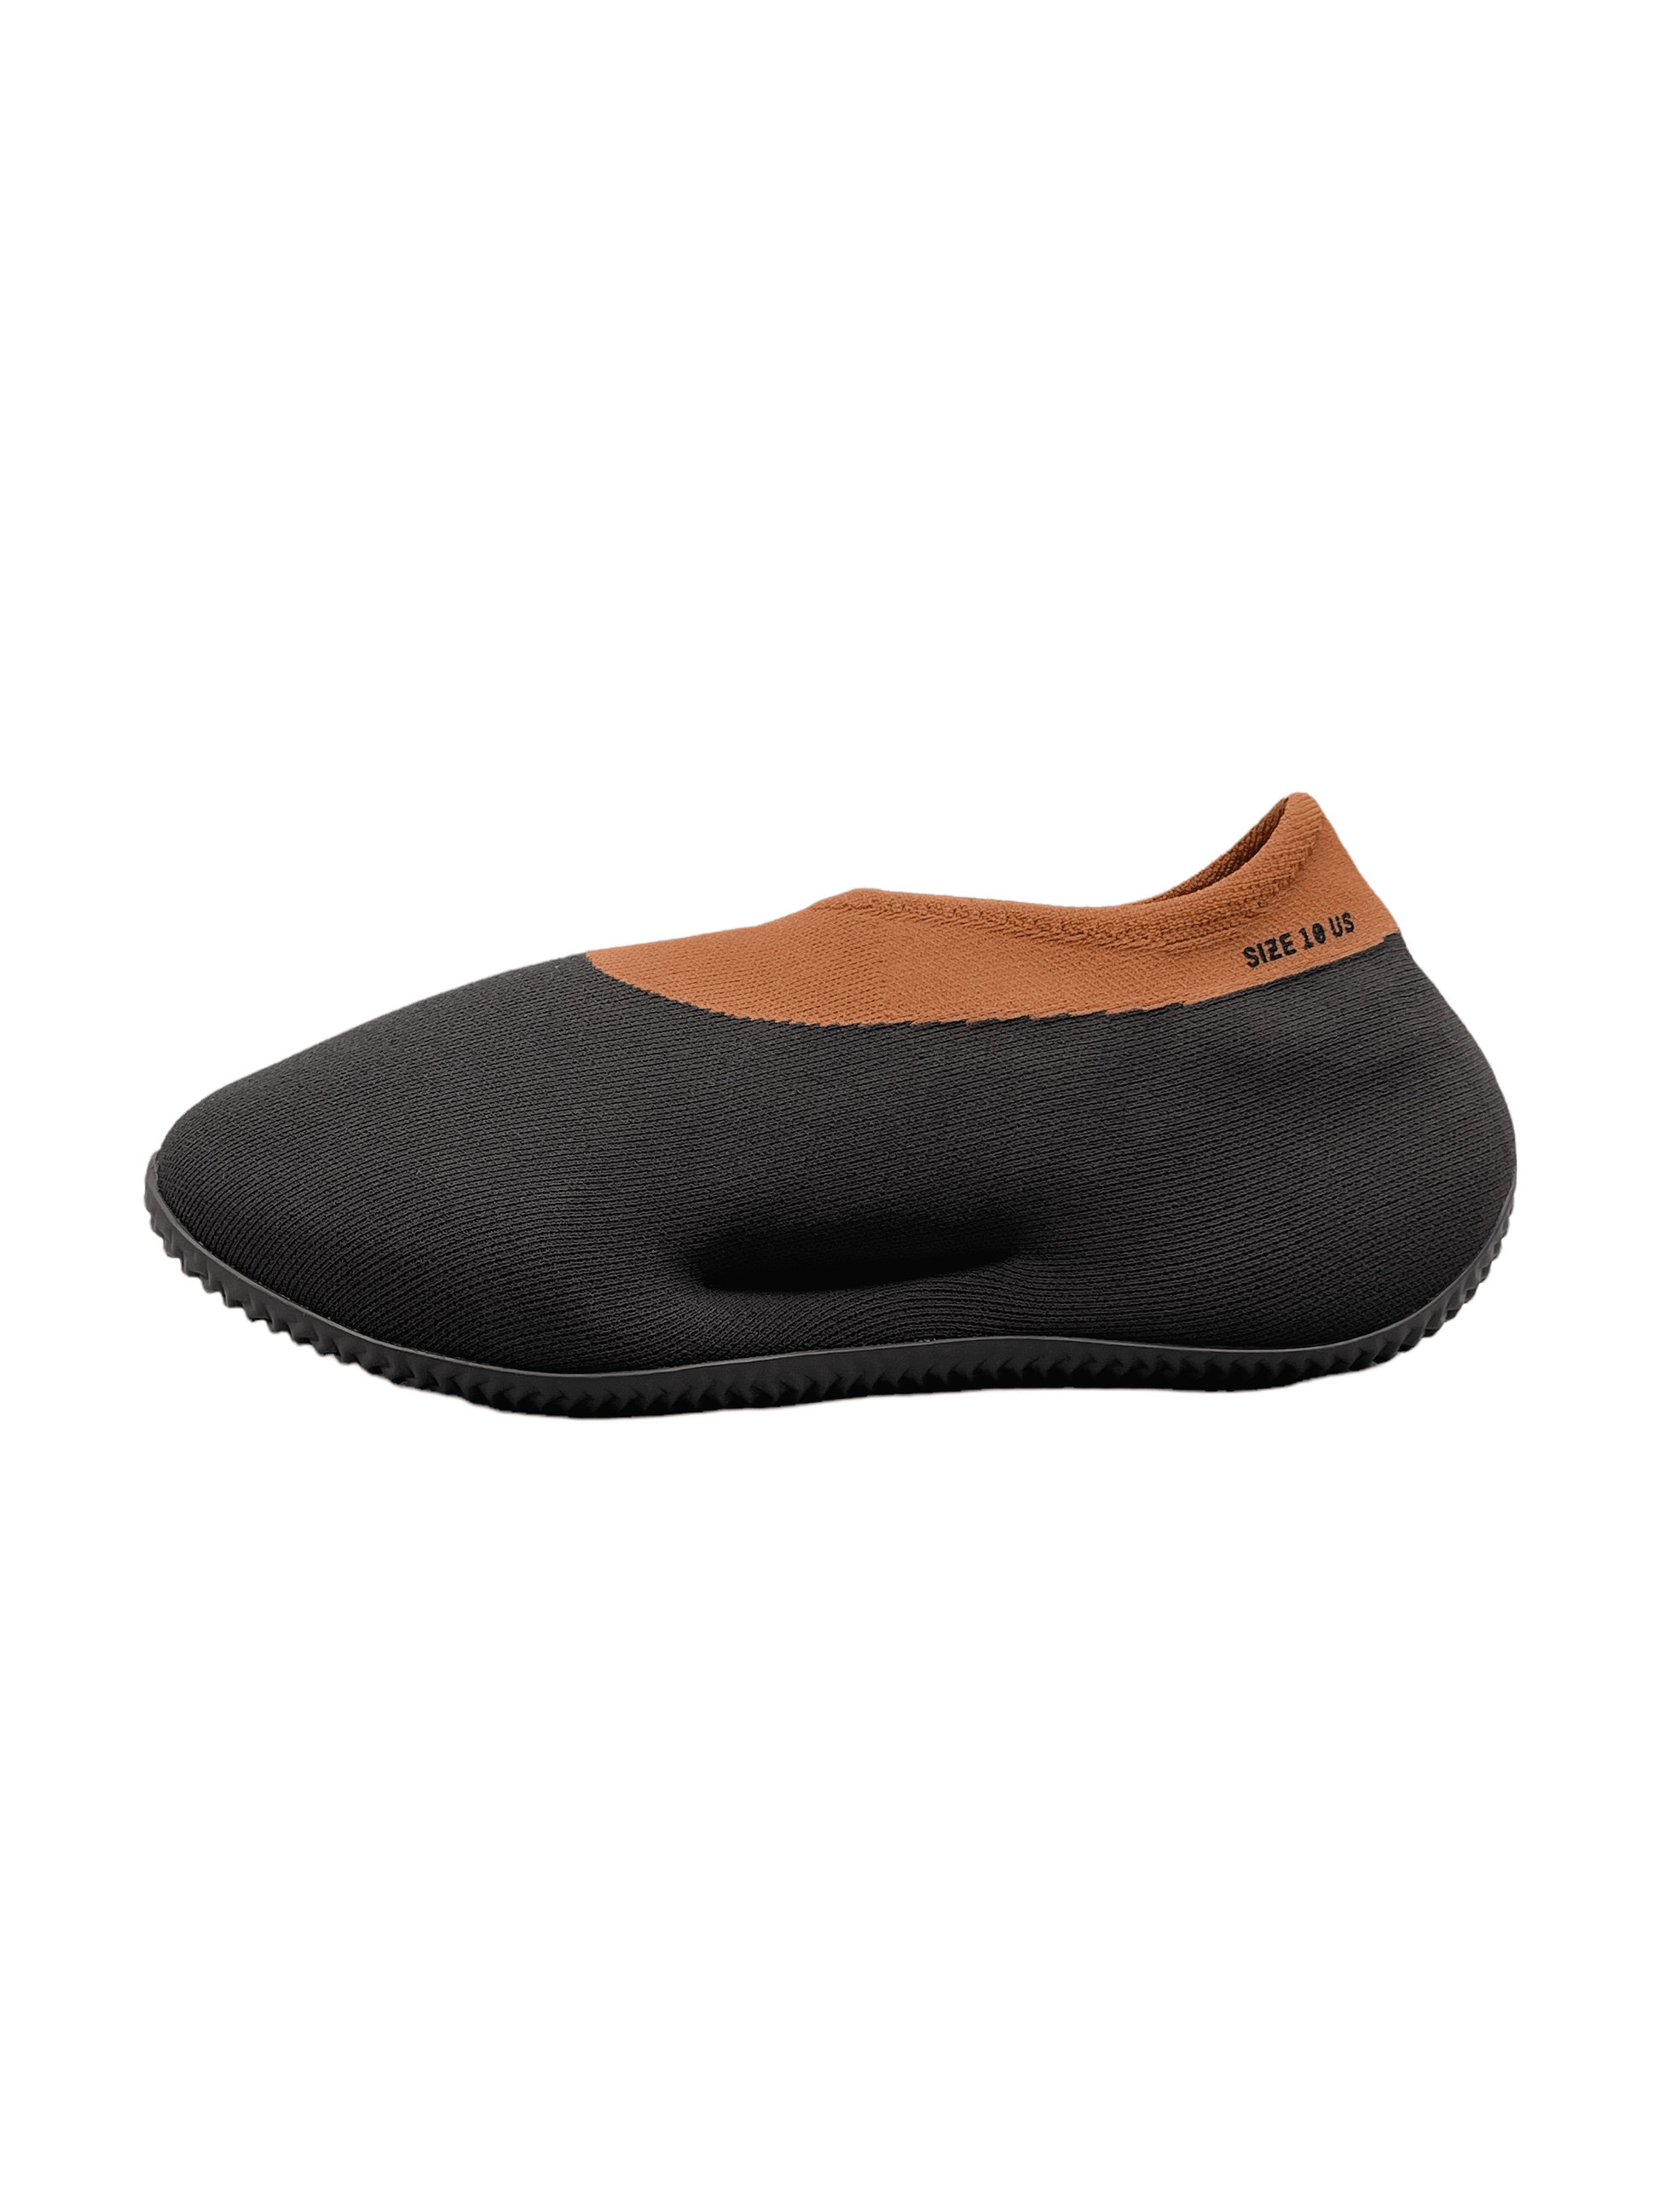 Adidas Yeezy Knit RNNR Stone Carbon Sneakers - Genuine Design Luxury Consignment for Men. New & Pre-Owned Clothing, Shoes, & Accessories. Calgary, Canada